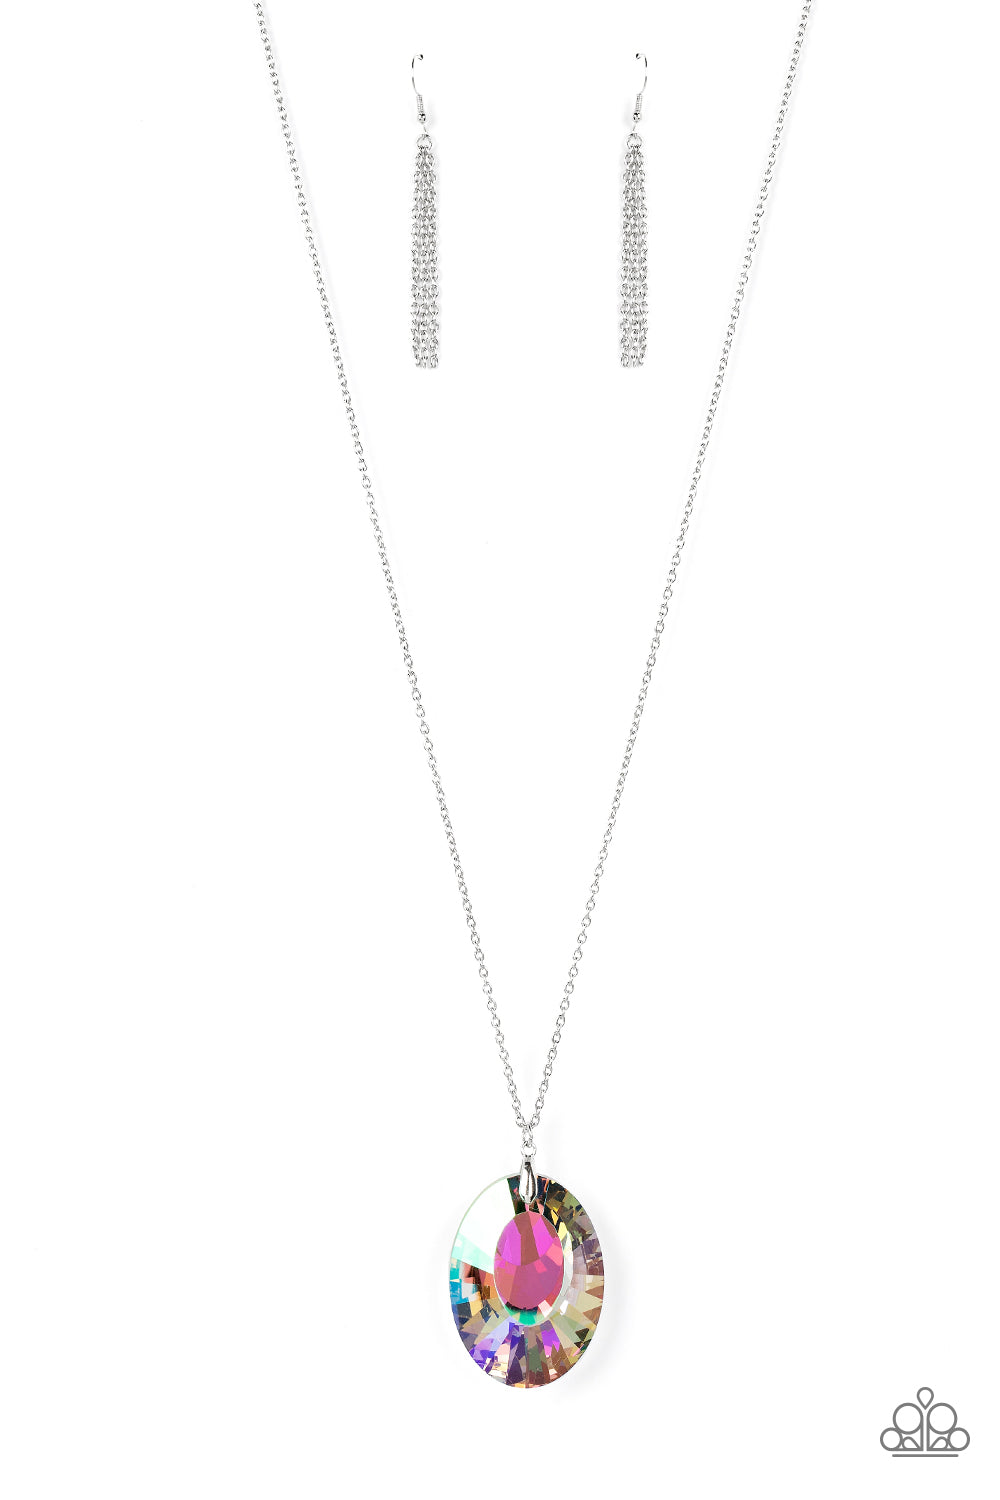 Paparazzi Celestial Essence - Multi Necklace - A Finishing Touch Jewelry